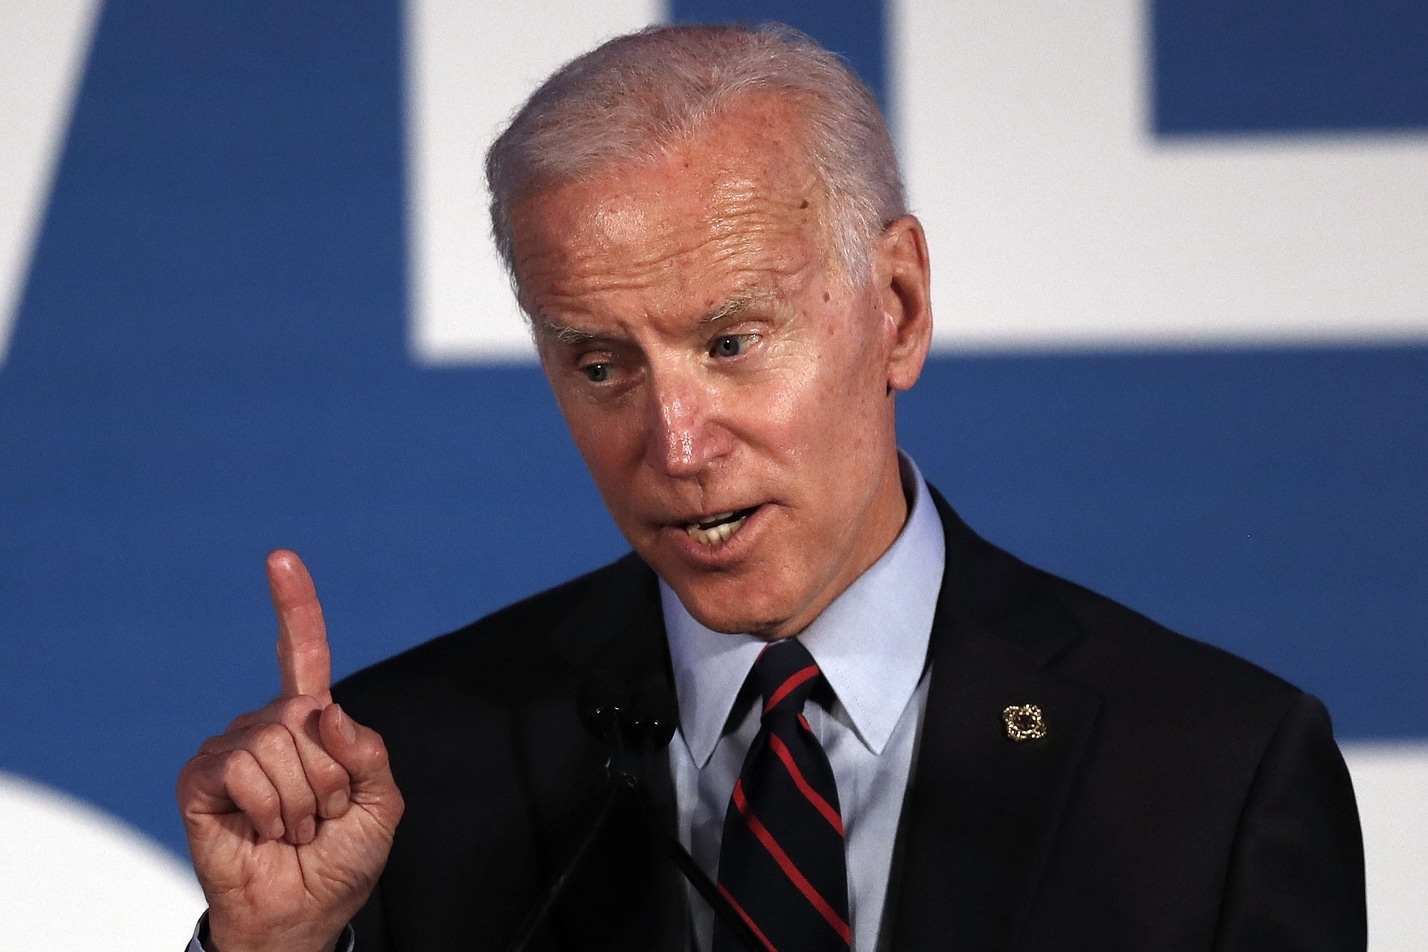 We know the former Vice President has years of experience, but how old is Joe Biden? Find out his real age.